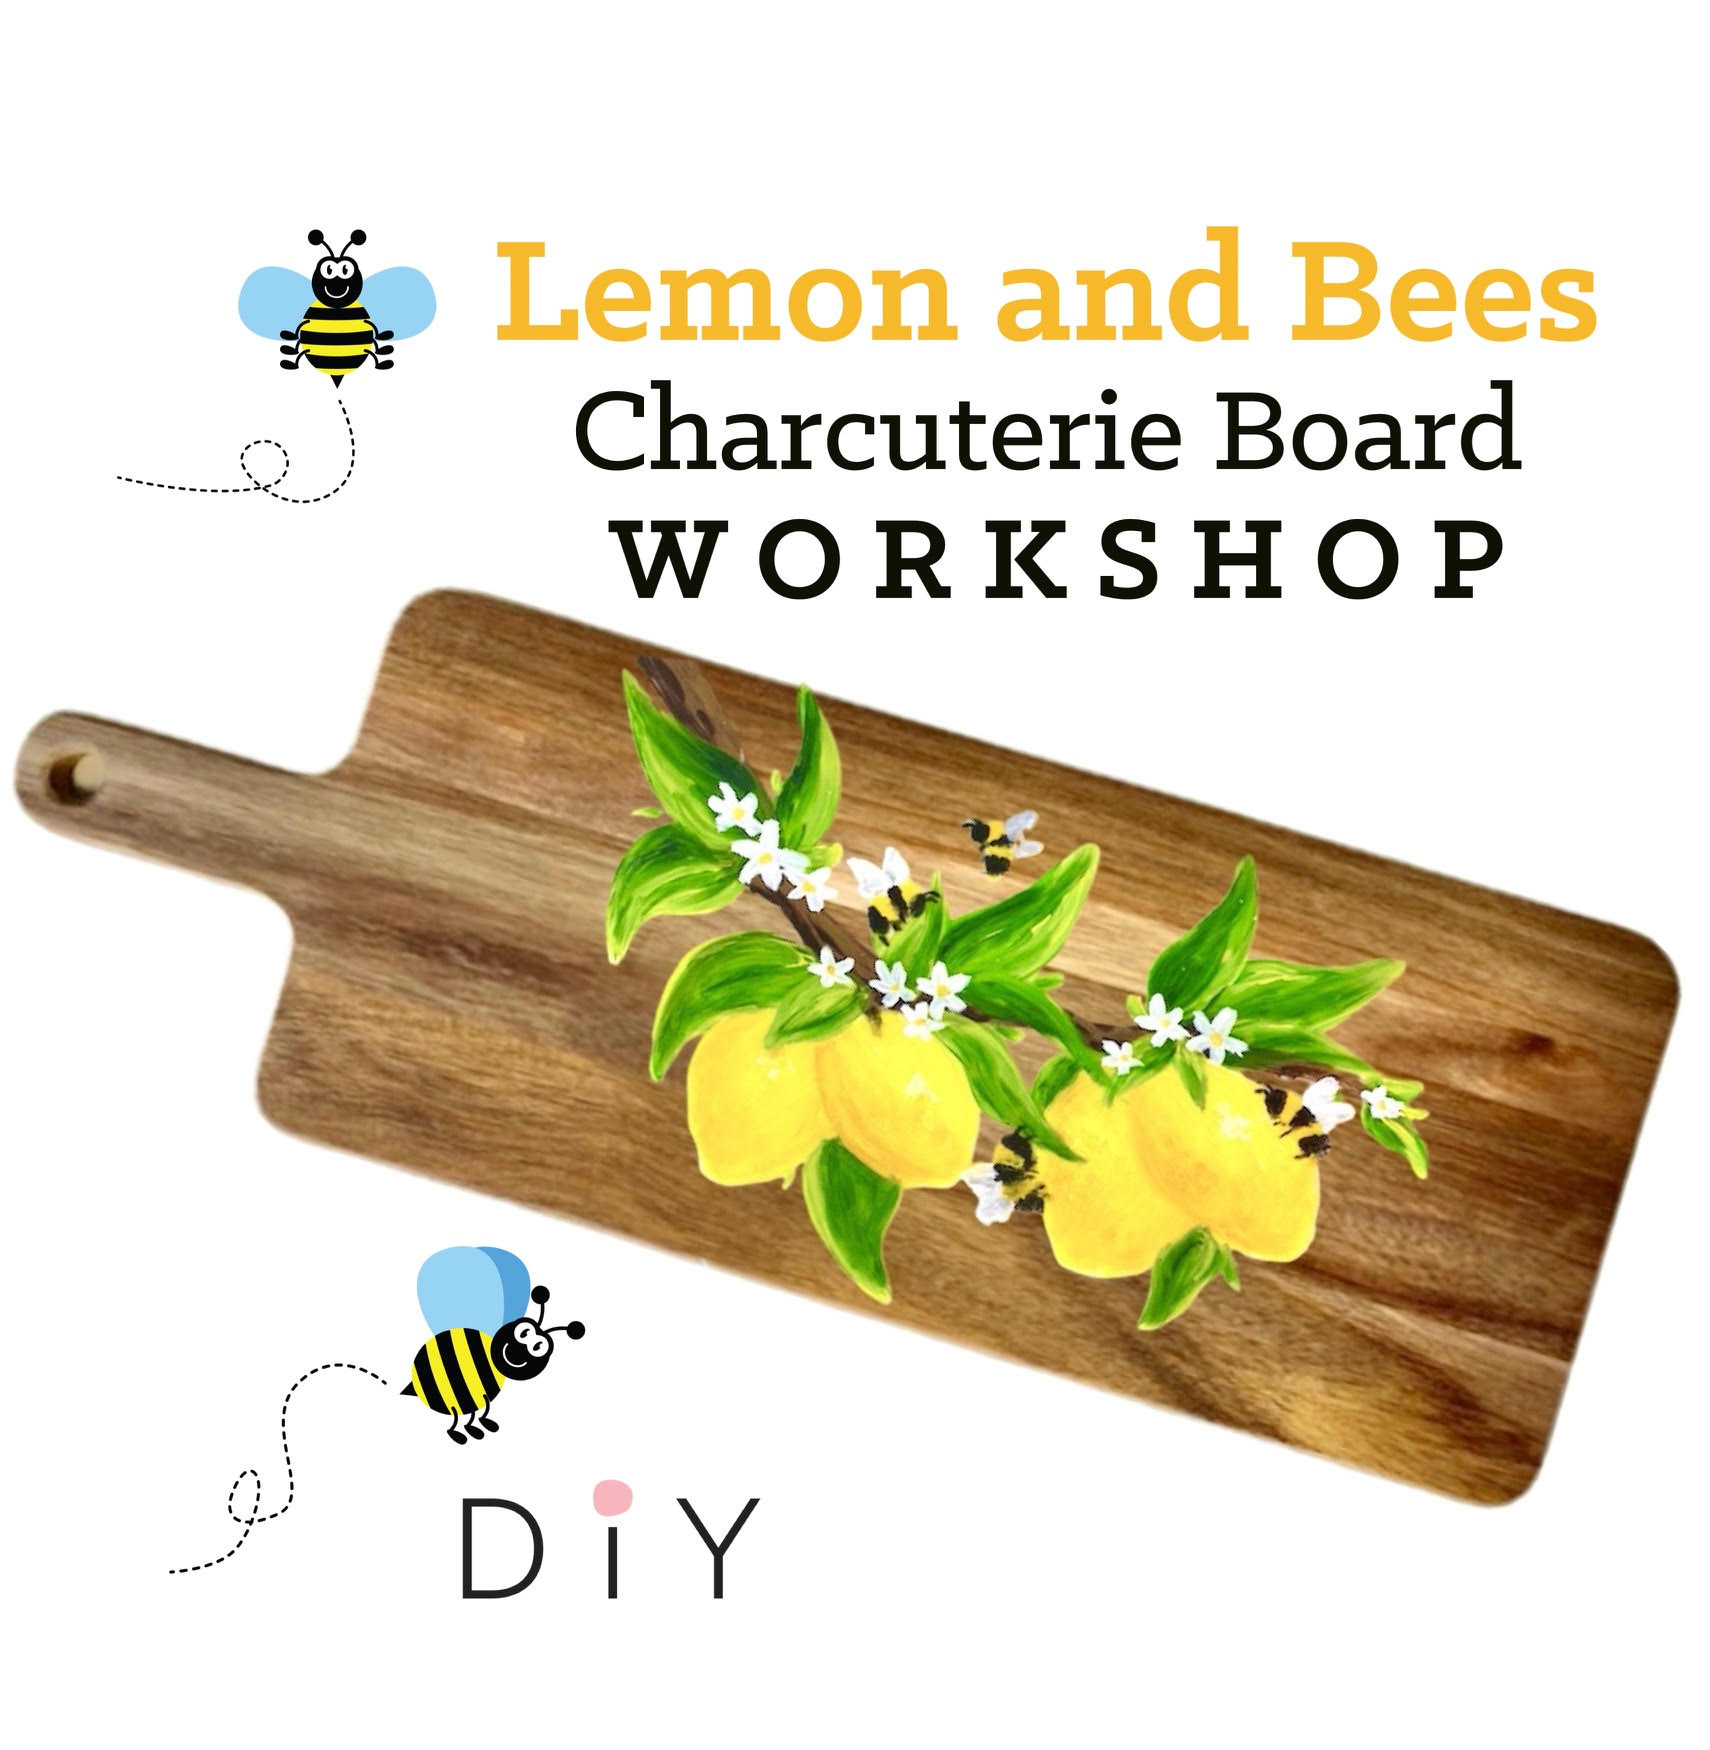 Lemon and Bees Please Charcuterie Board